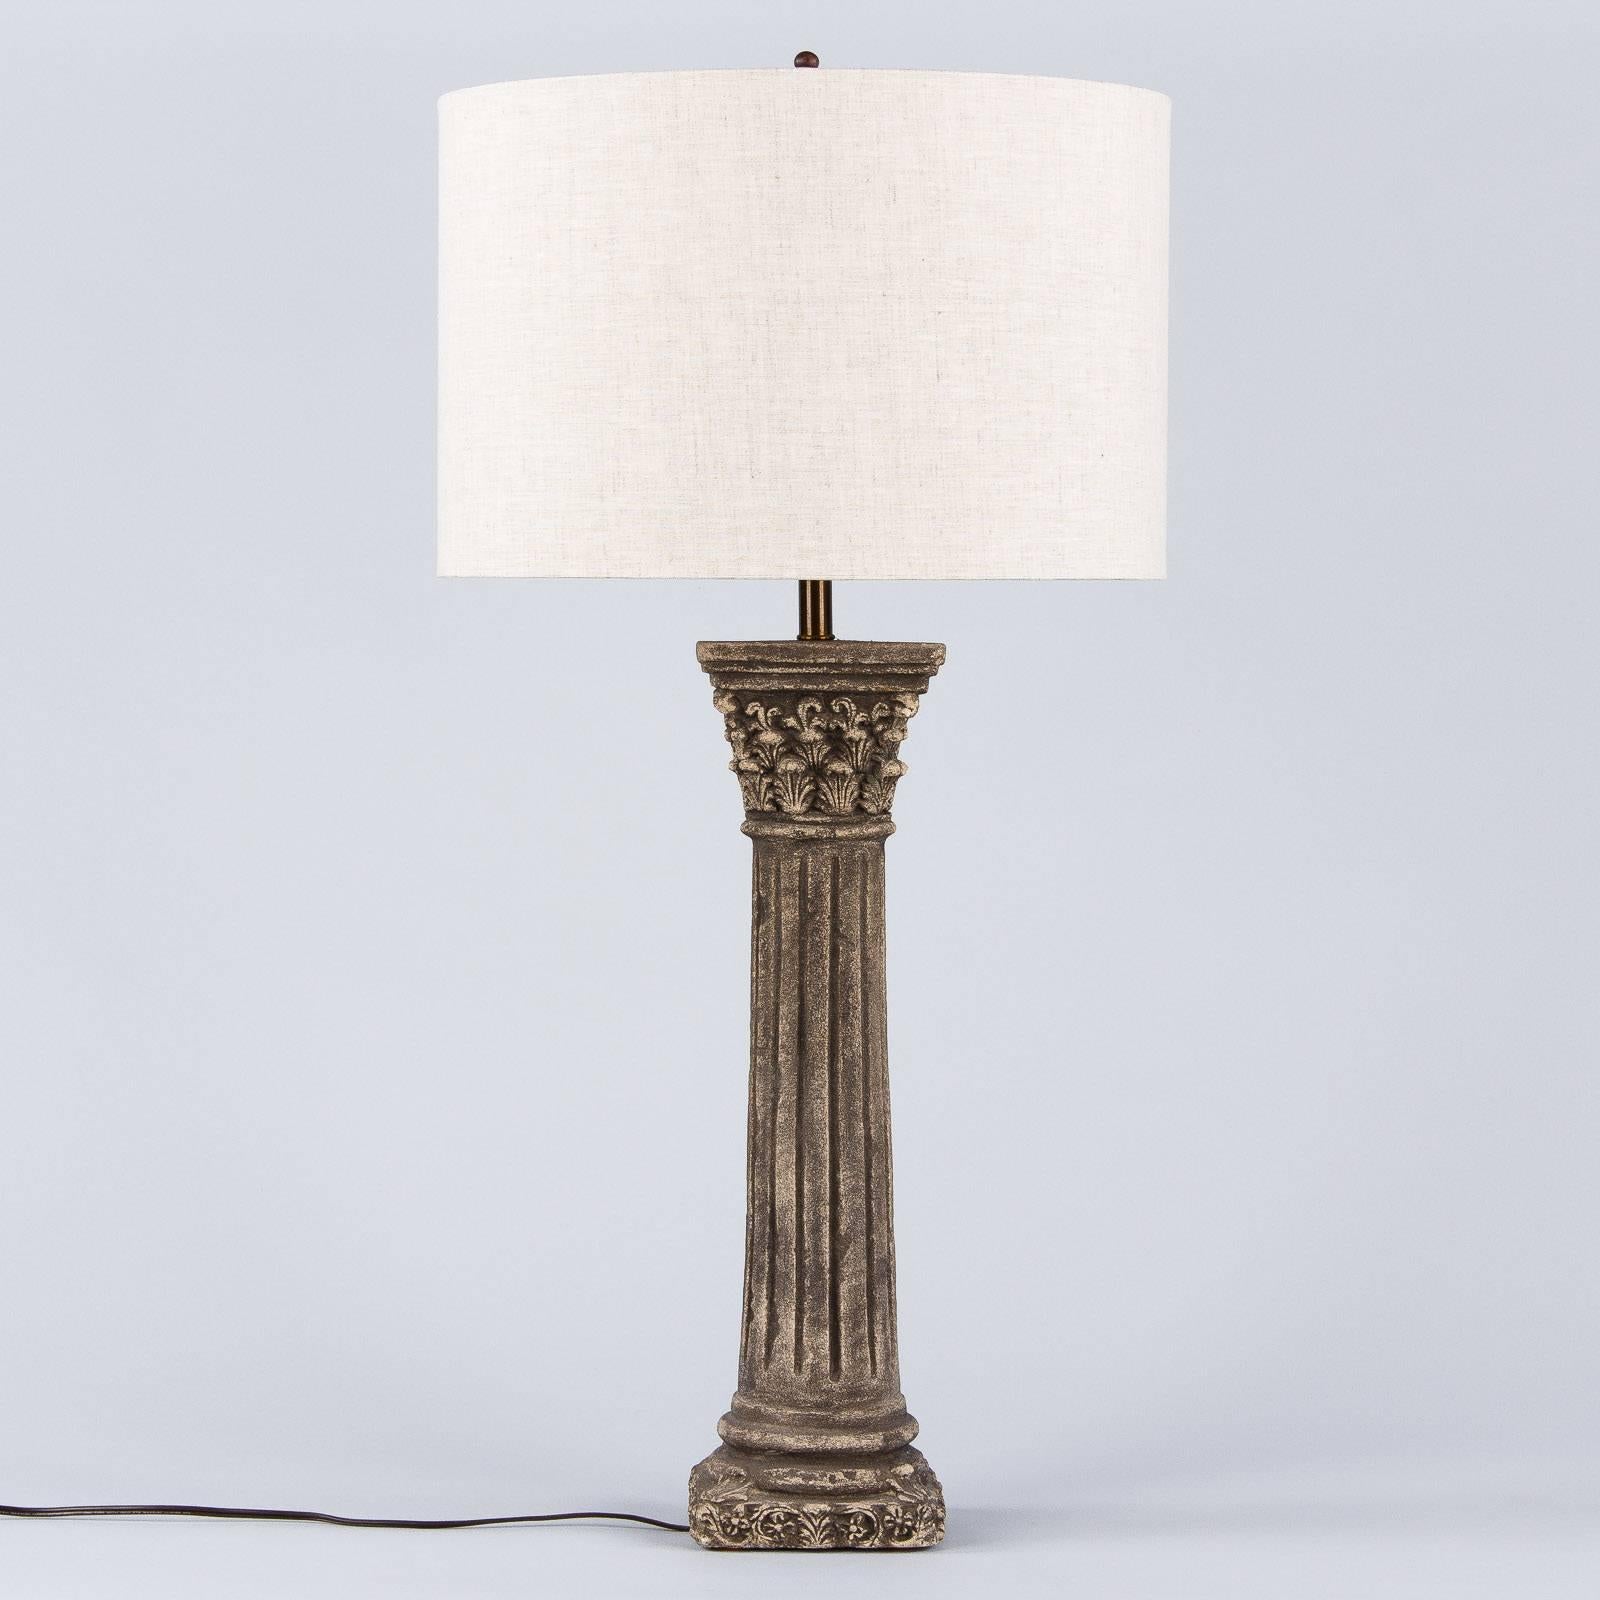 Neoclassical Revival French Corinthian Column Stone Lamp, 20th Century For Sale